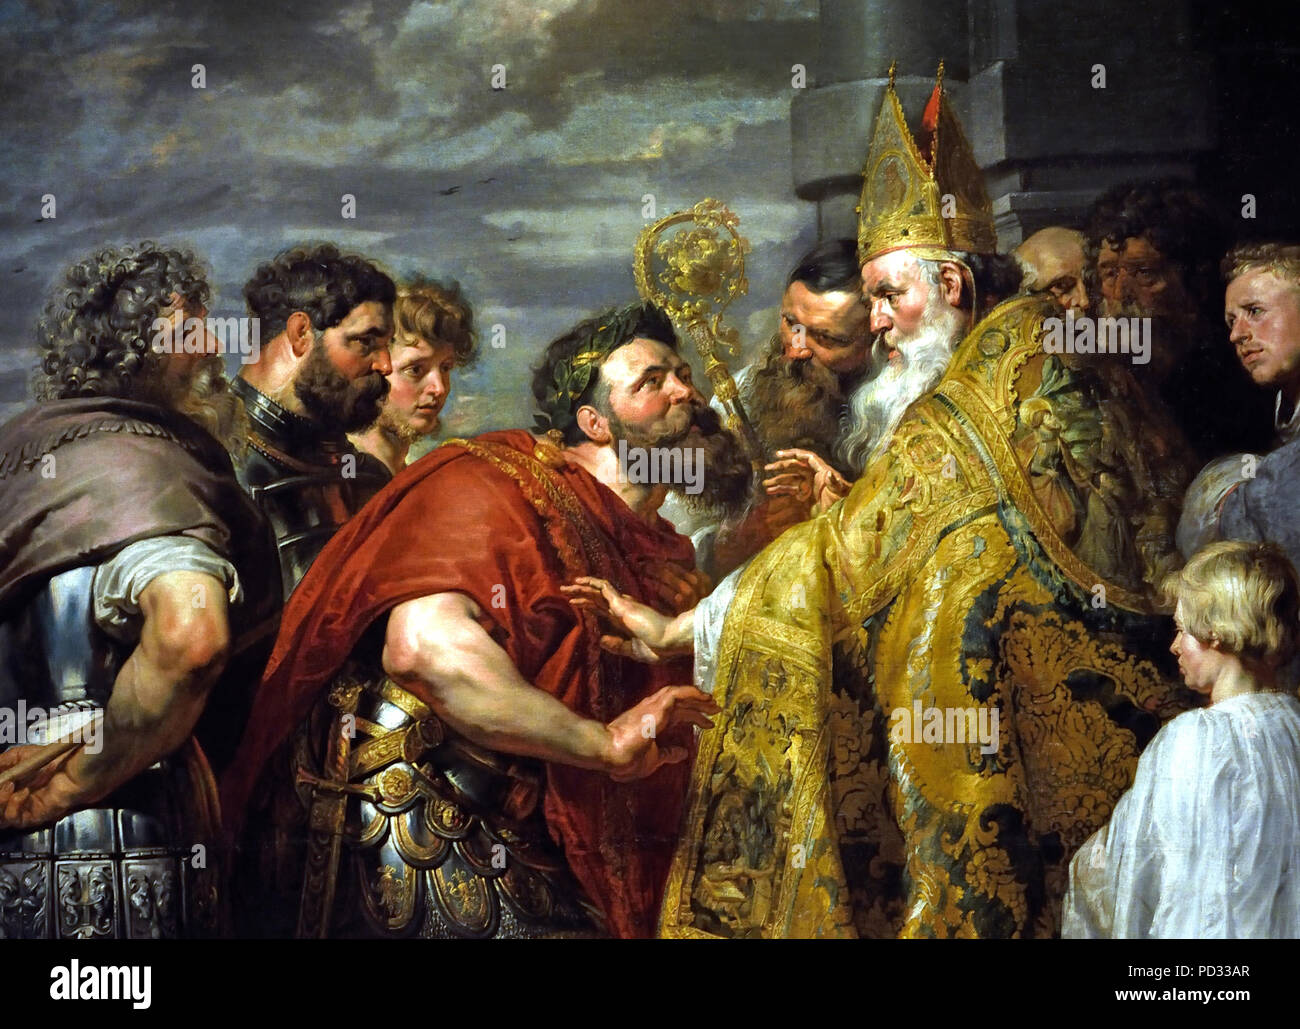 St Ambrose and Emperor Theodosius  by Peter Paul Rubens (1577–1640) Flemish Belgian Belgium ( It shows the Roman emperor Theodosius I and his entourage being barred from Milan Cathedral by its archbishop saint Ambrose, as punishment for the Massacre of Thessalonica. ) Stock Photo